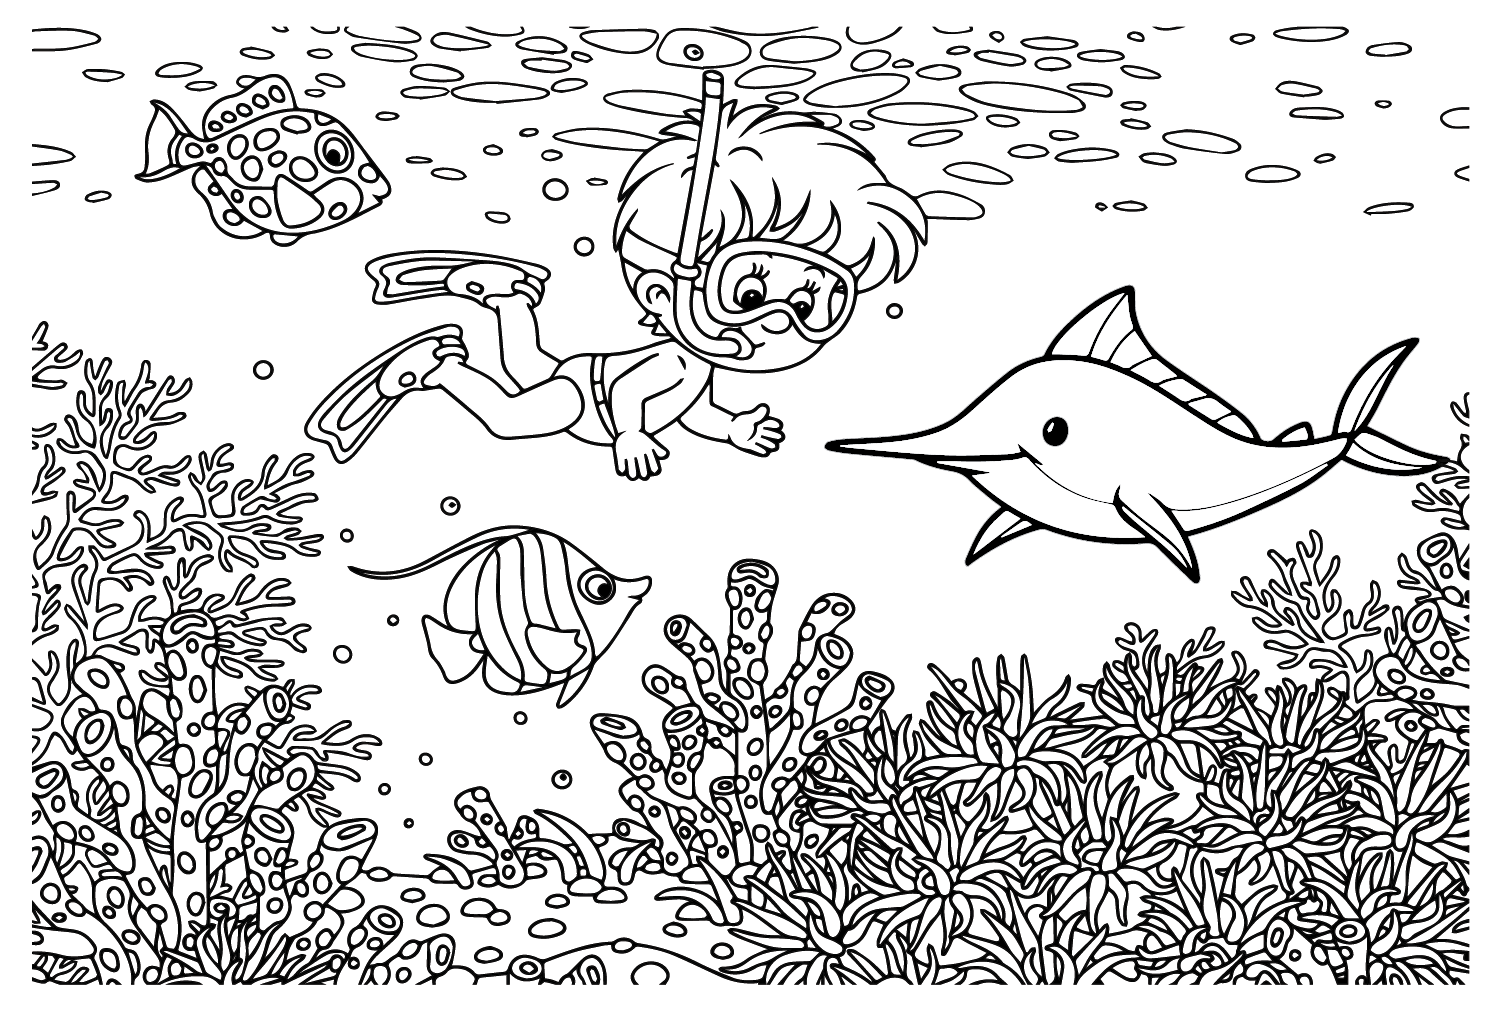 Marlin and Diver Coloring Page